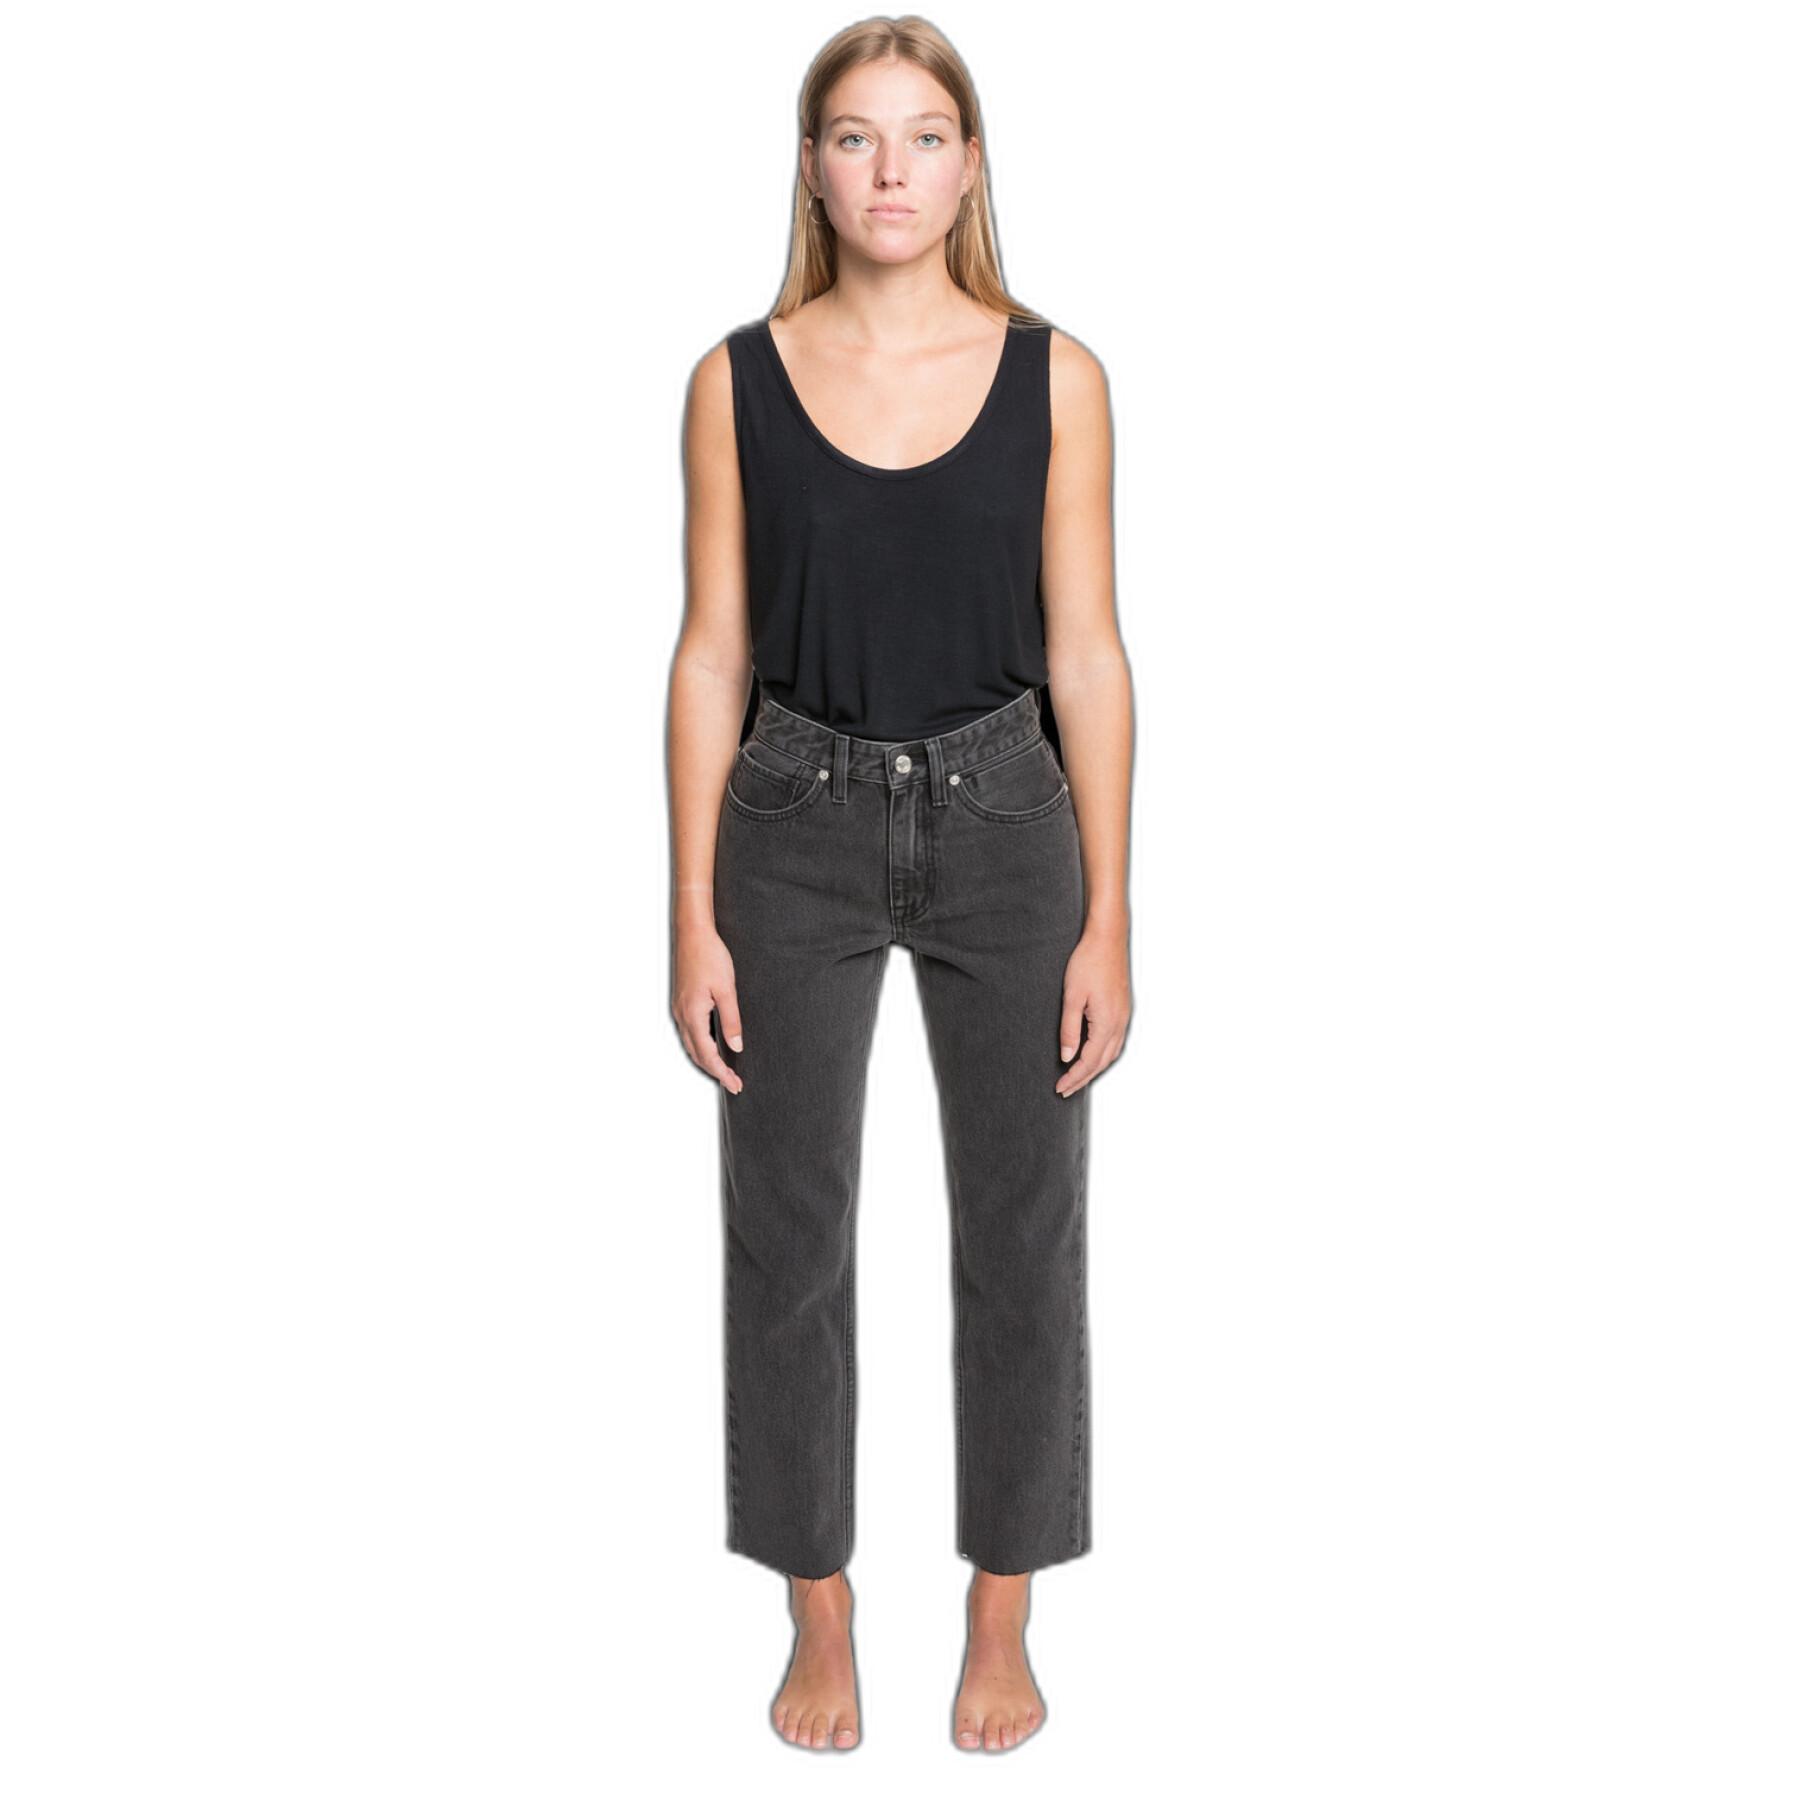 Jeans femme Quiksilver The Up Size